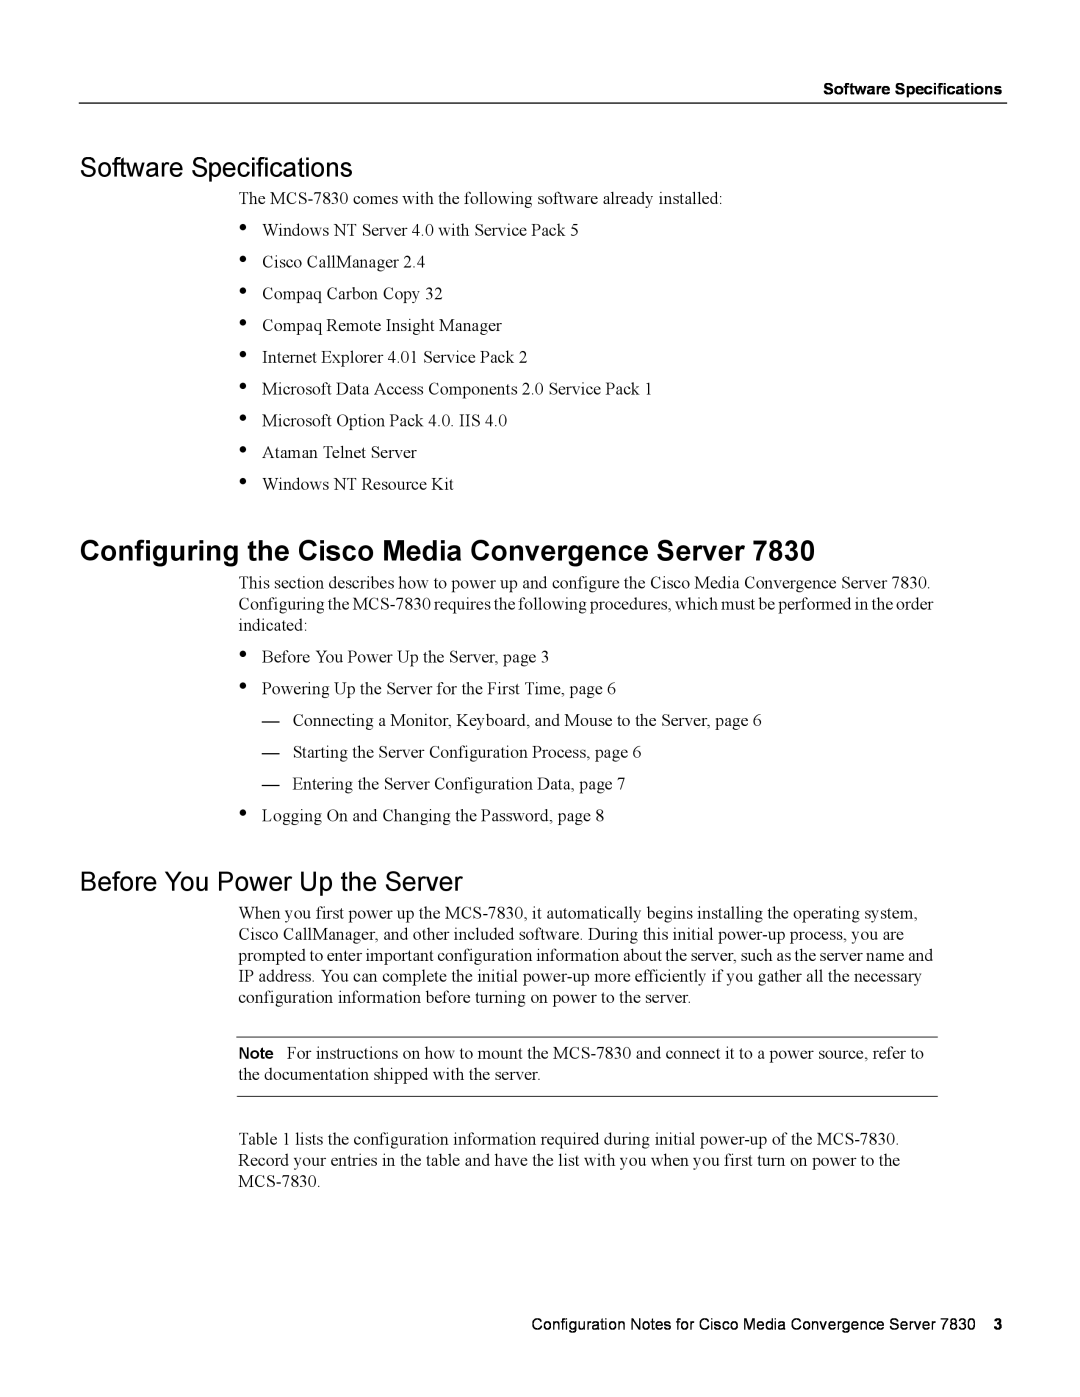 Cisco Systems 7830 Configuring the Cisco Media Convergence Server, Software Specifications, Before You Power Up the Server 